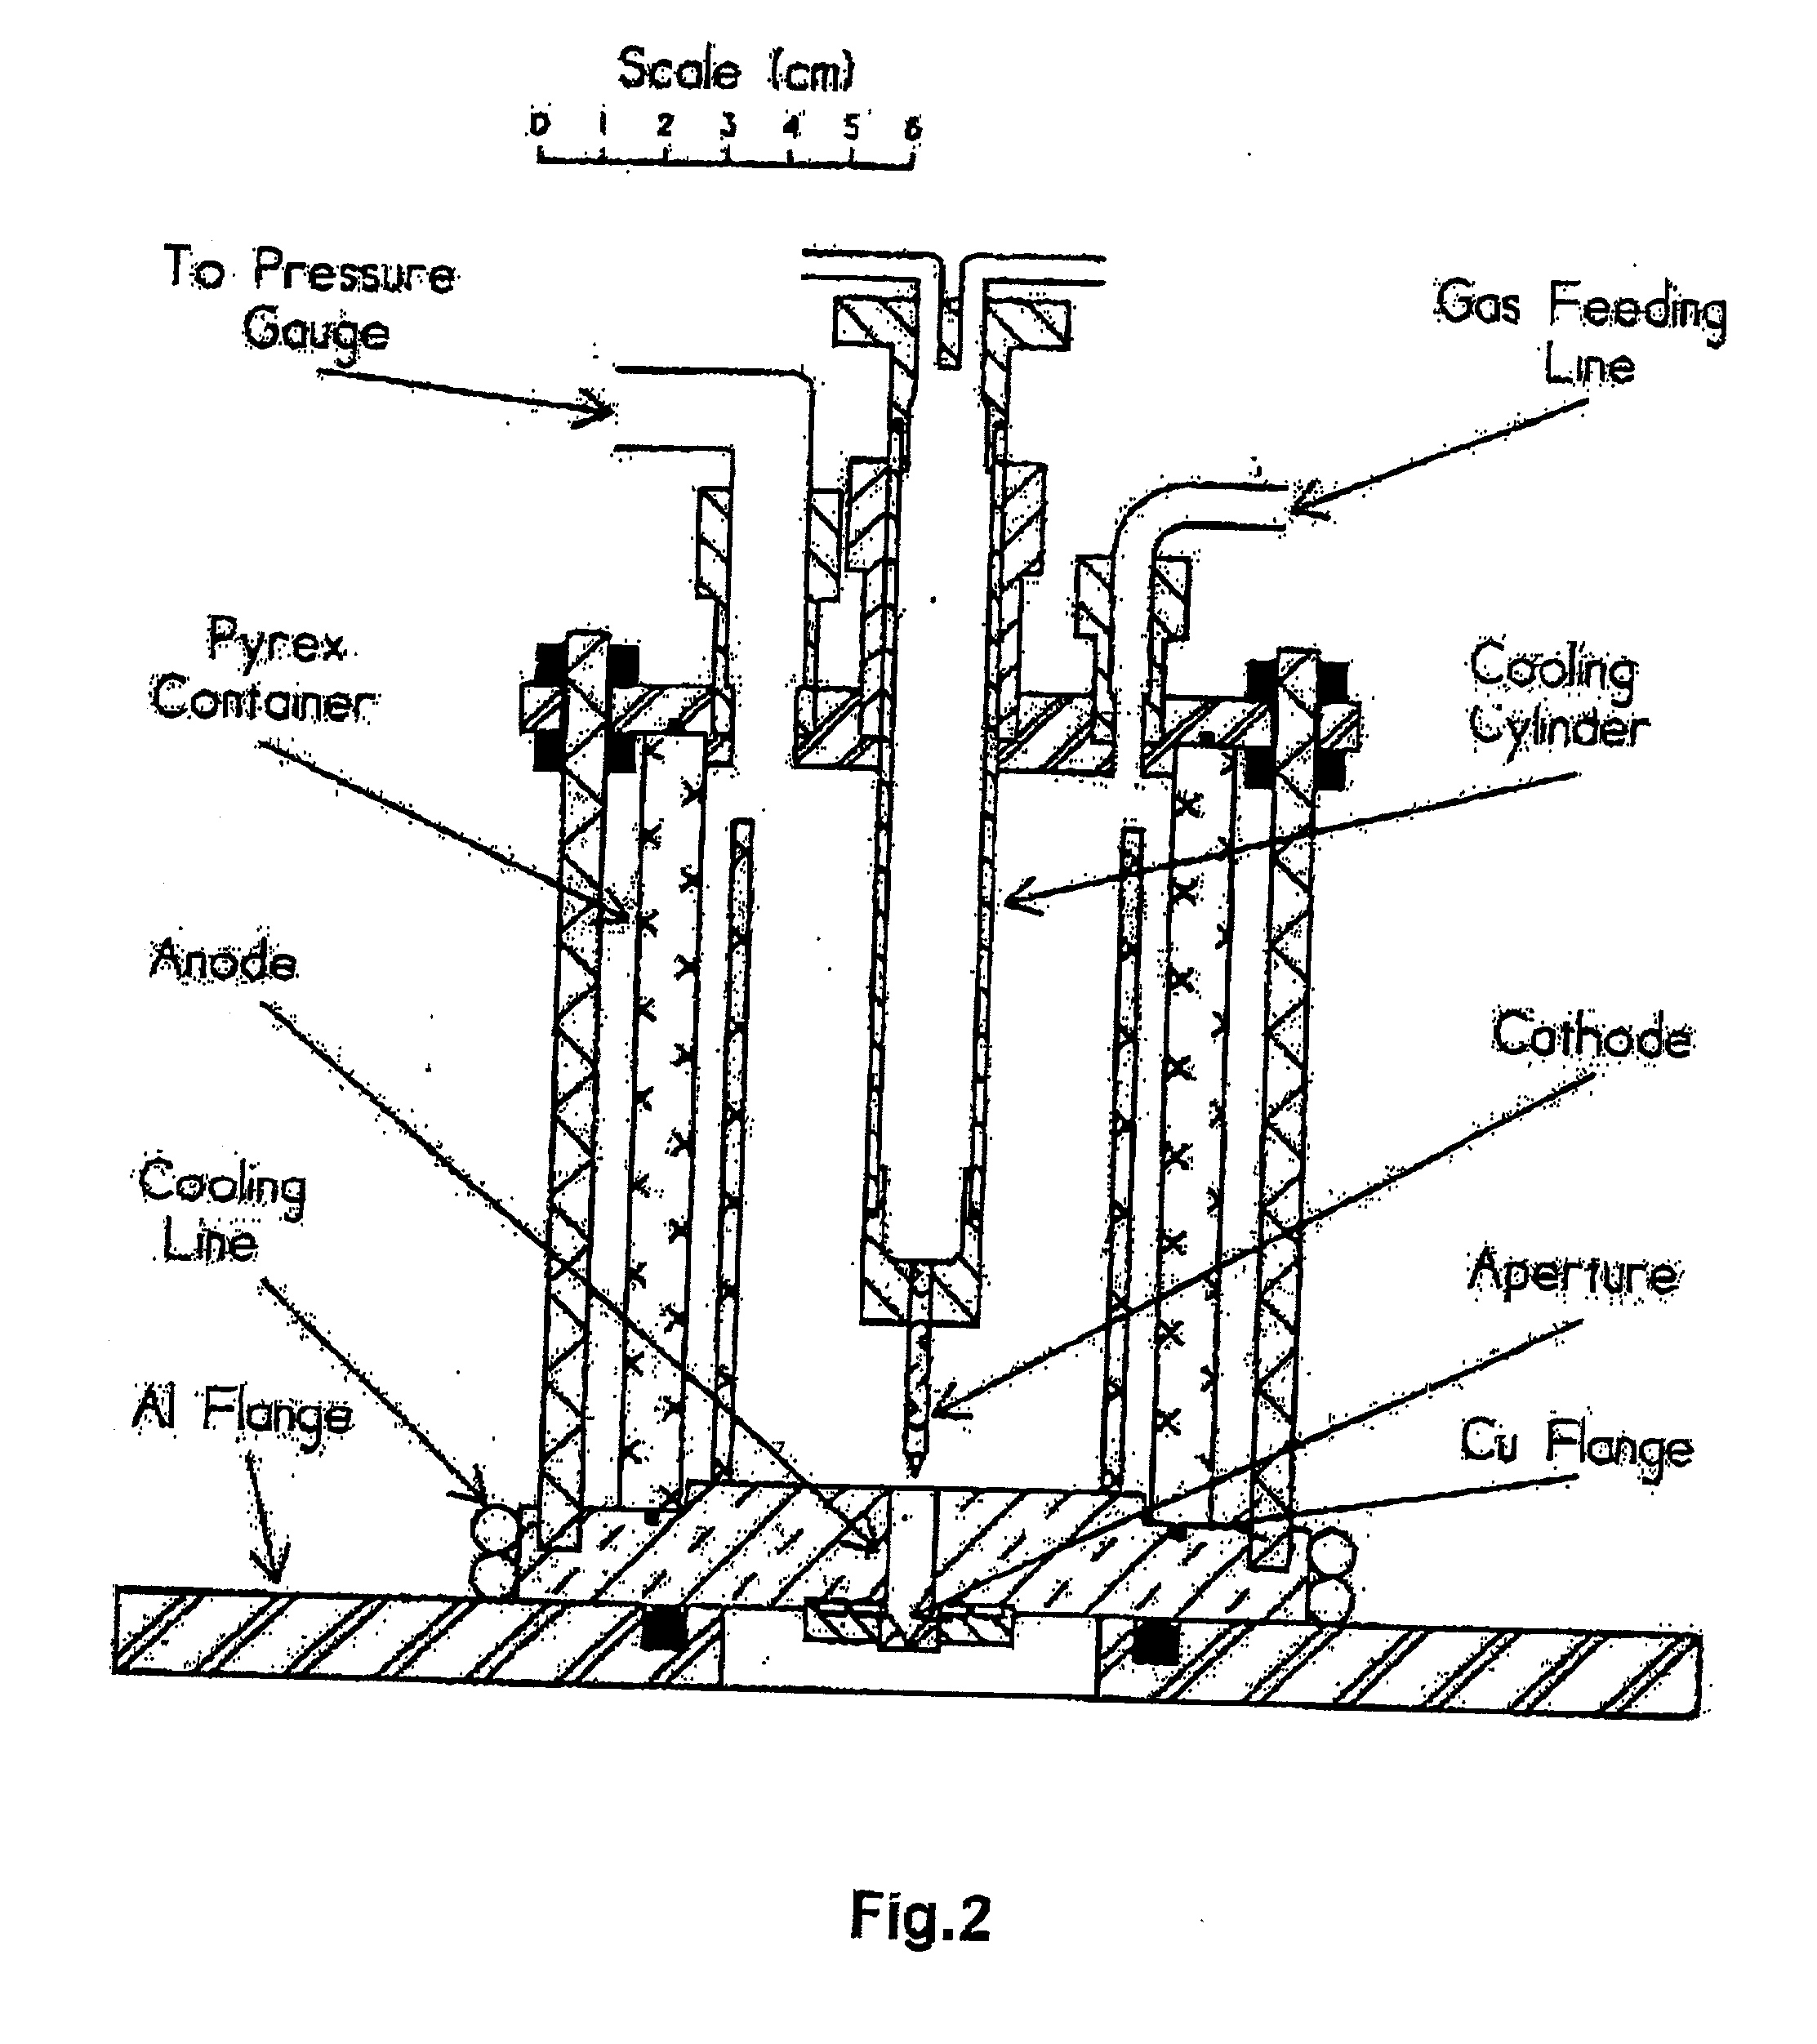 Method and appratatus for producing atomic flows of molecular gases